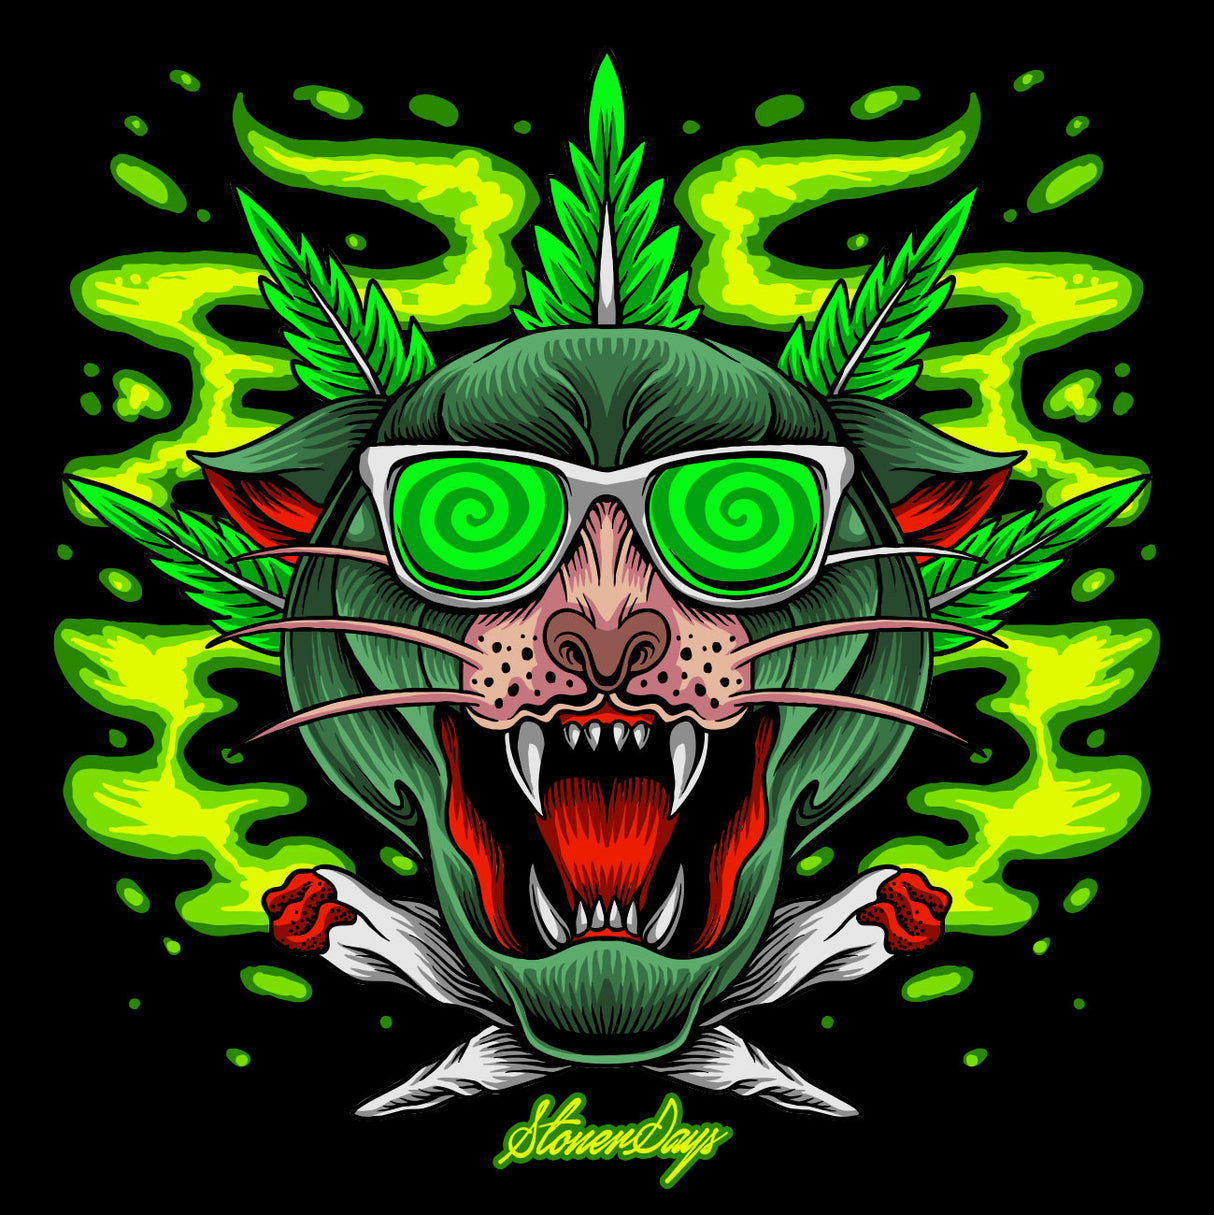 StonerDays Greenz Panther Hoodie with vibrant green cannabis-inspired graphic on black background